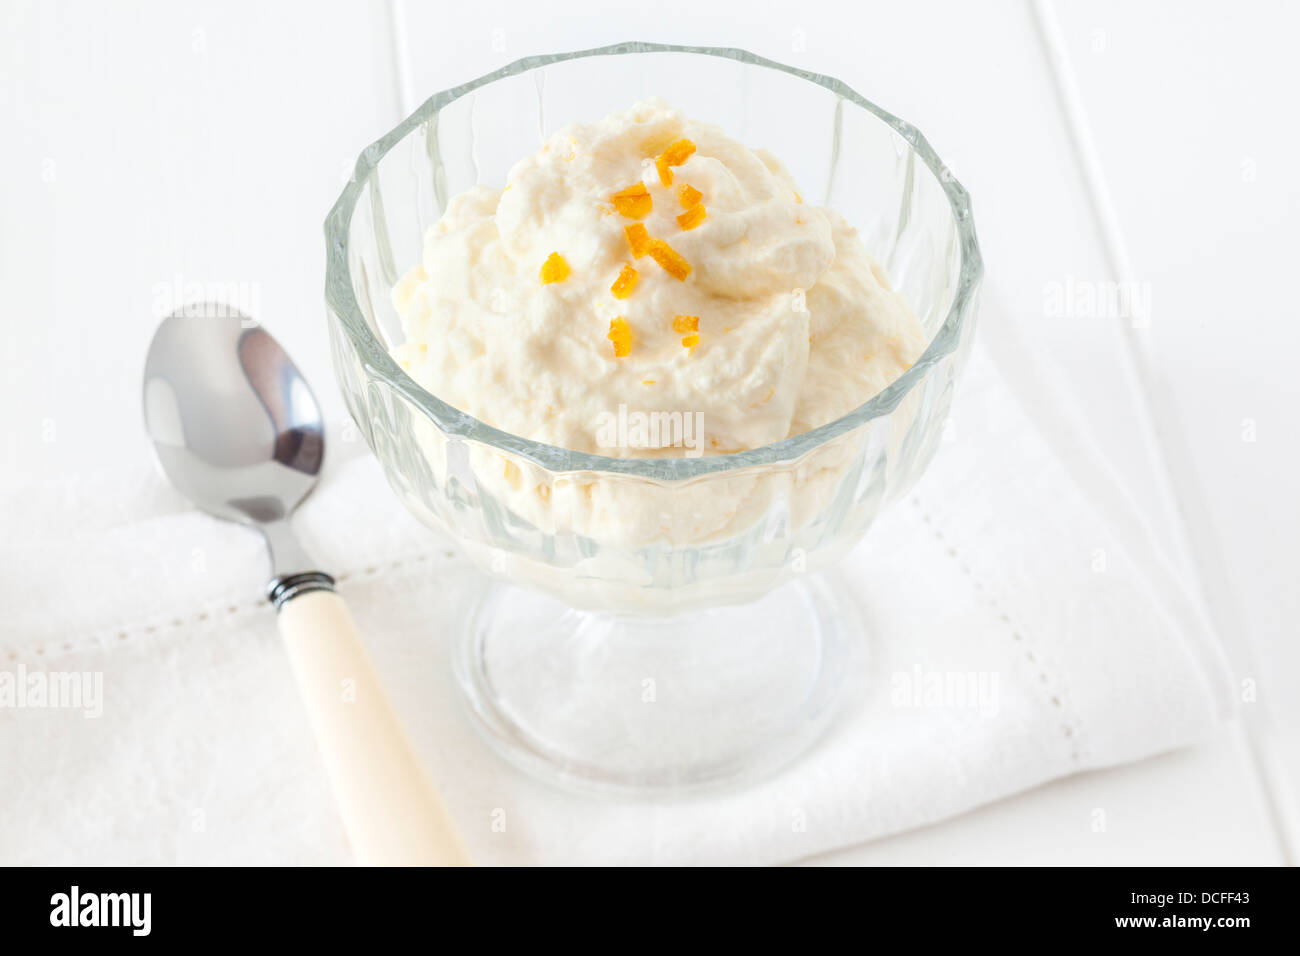 Syllabub - traditional English dessert made from whipped cream, light rum and flavoured with lemon and orange. Stock Photo